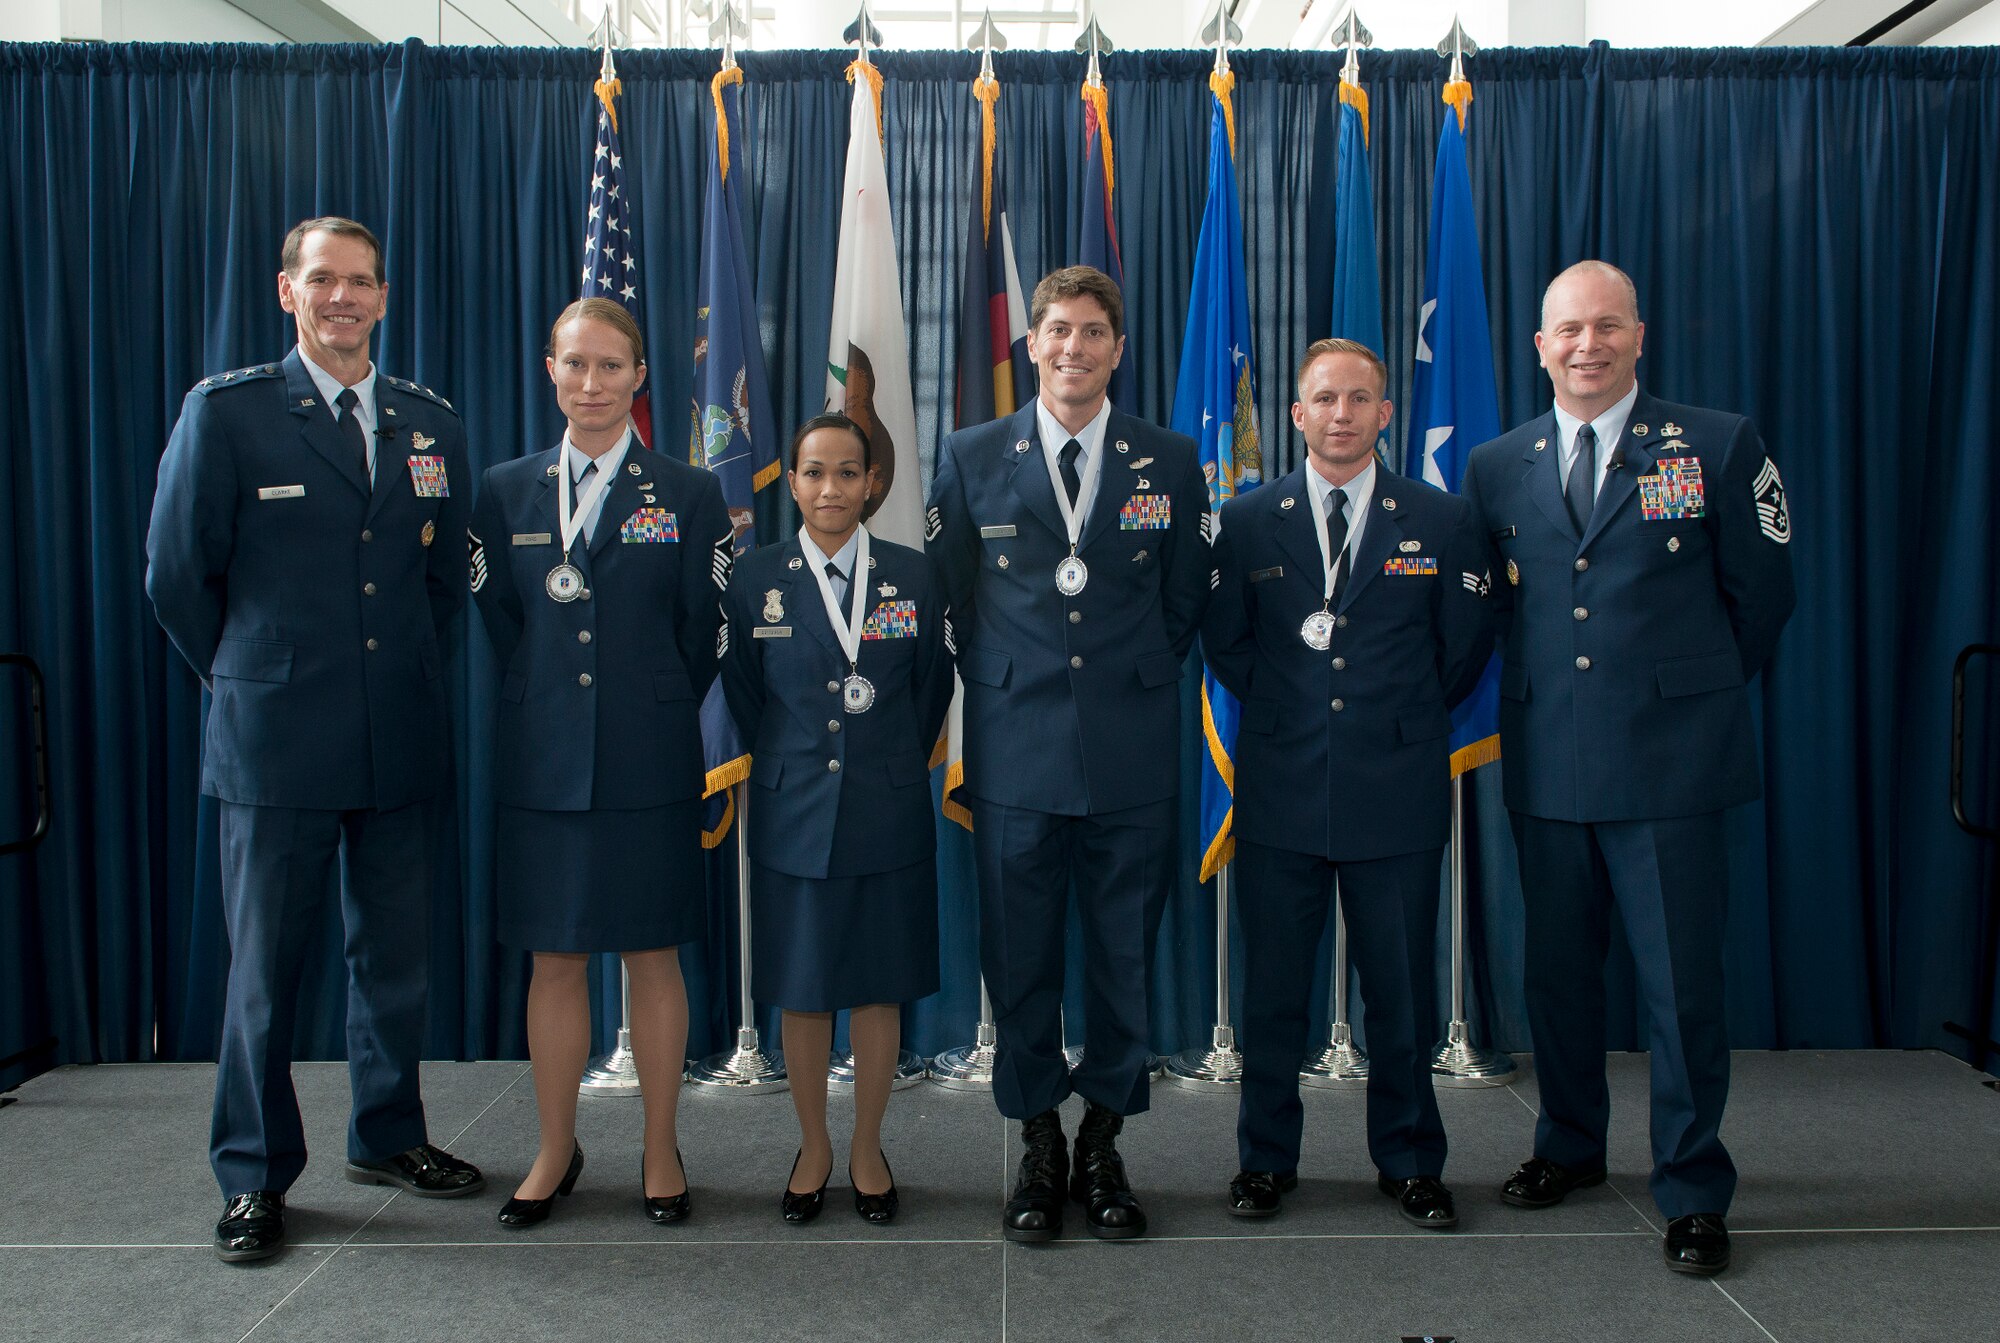 Lieutenant Gen. Stanley E. Clarke III, director of the ANG (left) and Chief Master Sgt. James W. Hotaling, command chief master sergeant of the ANG (far right), stand with the ANG outstanding Airmen of the Year during an All Call event Joint Base Andrews Md., Aug 6, 2015. The OAY winners are (left to right) Master Sgt. Sally J. Ford, Outstanding First Sergeant of the Year, Master Sergeant Maria Victoria R. Quitugua, Outstanding Senior NCO of the Year, Staff Sgt. Douglas P. Kechijian, Outstanding Non-Commissioned Officer of the Year and Senior Airman Jonathan R. Smail, Outstanding Airman of the Year. (Air National Guard photo by Master Sergeant Marvin. R. Preston, Released)